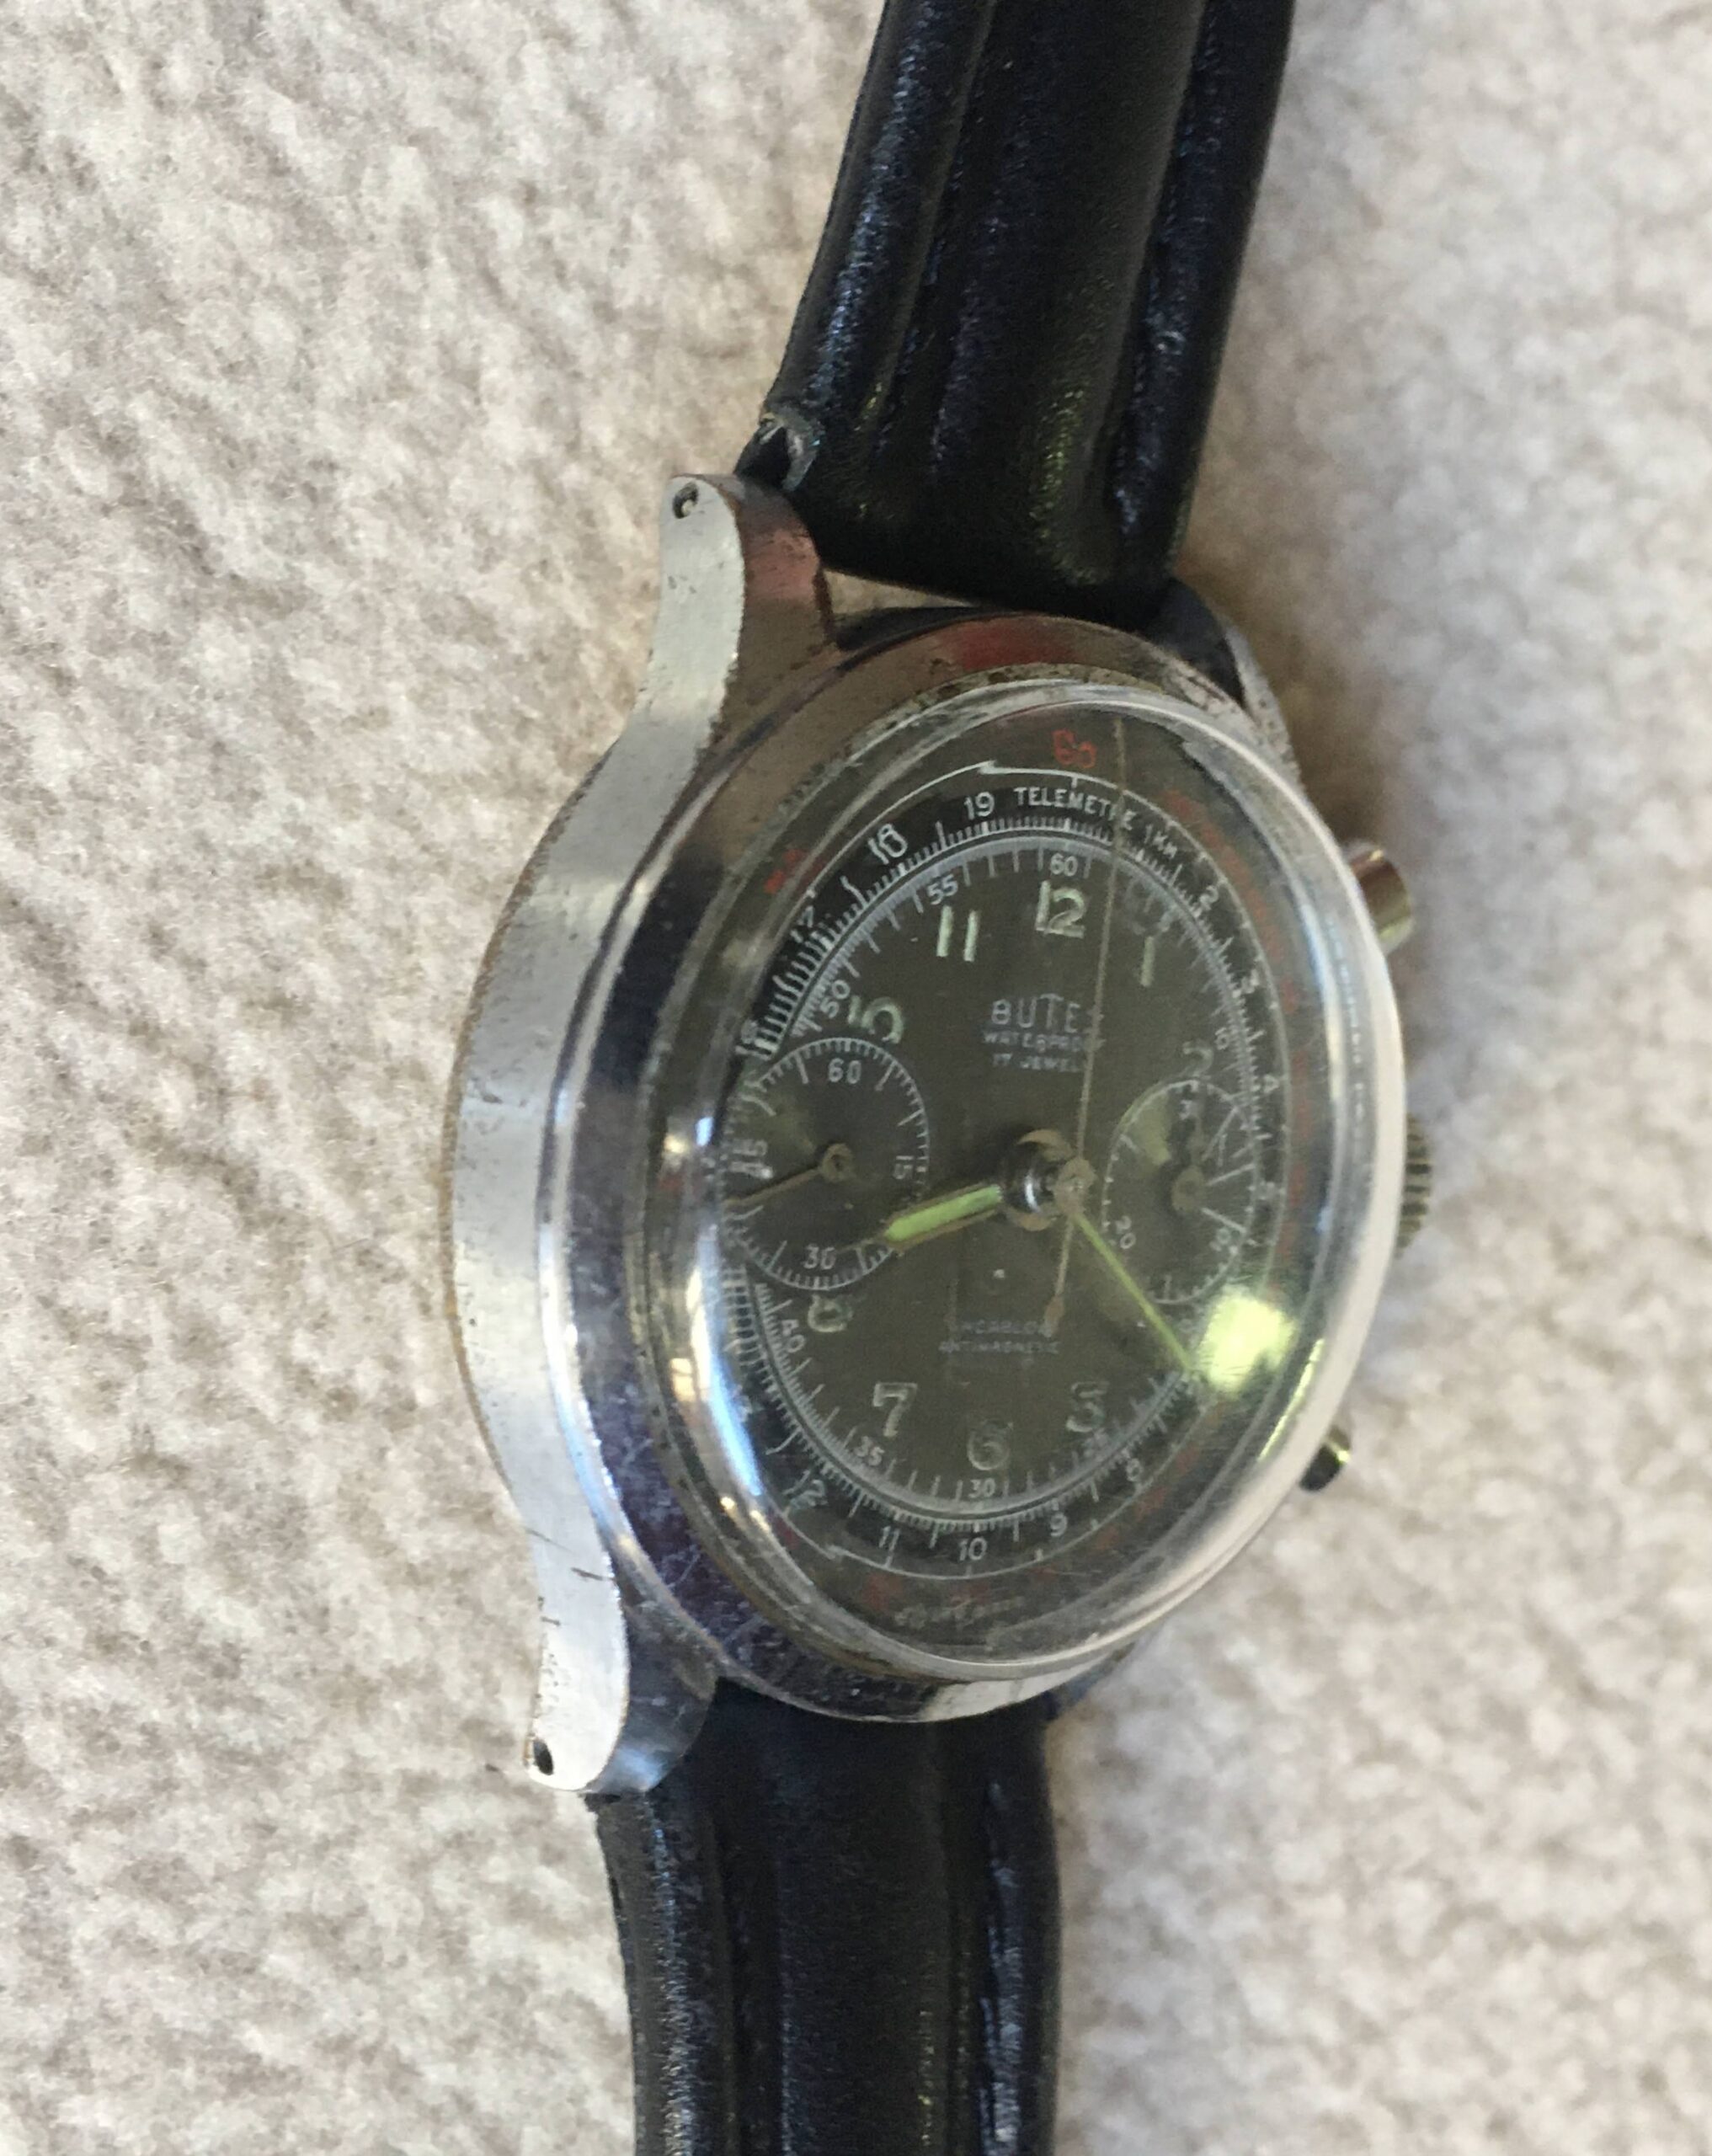 Butex Vintage Chronograph with Waterproof Pushers – My Vintage Watch